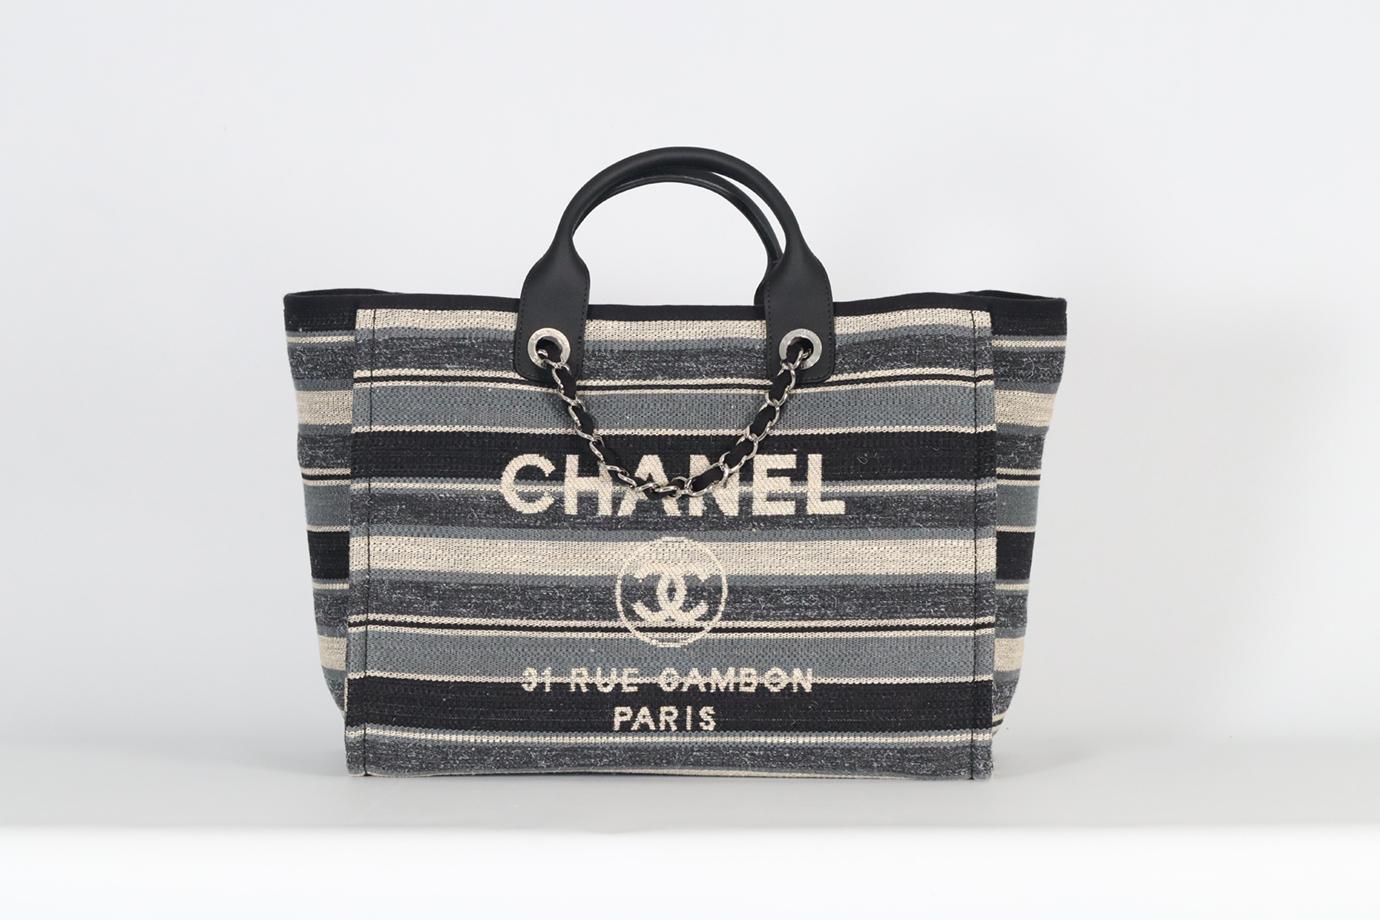 Chanel 2018 Deauville Medium Canvas And Leather Tote Bag.
Grey, black, cream and blue.
Magnetic fastening - Top.
Comes with Authenticity Card.
Does not come with - dustbag or box.
Model: Deauville.
Height: 11.4 in.
Width: 15 in.
Depth: 8 in.
Handle